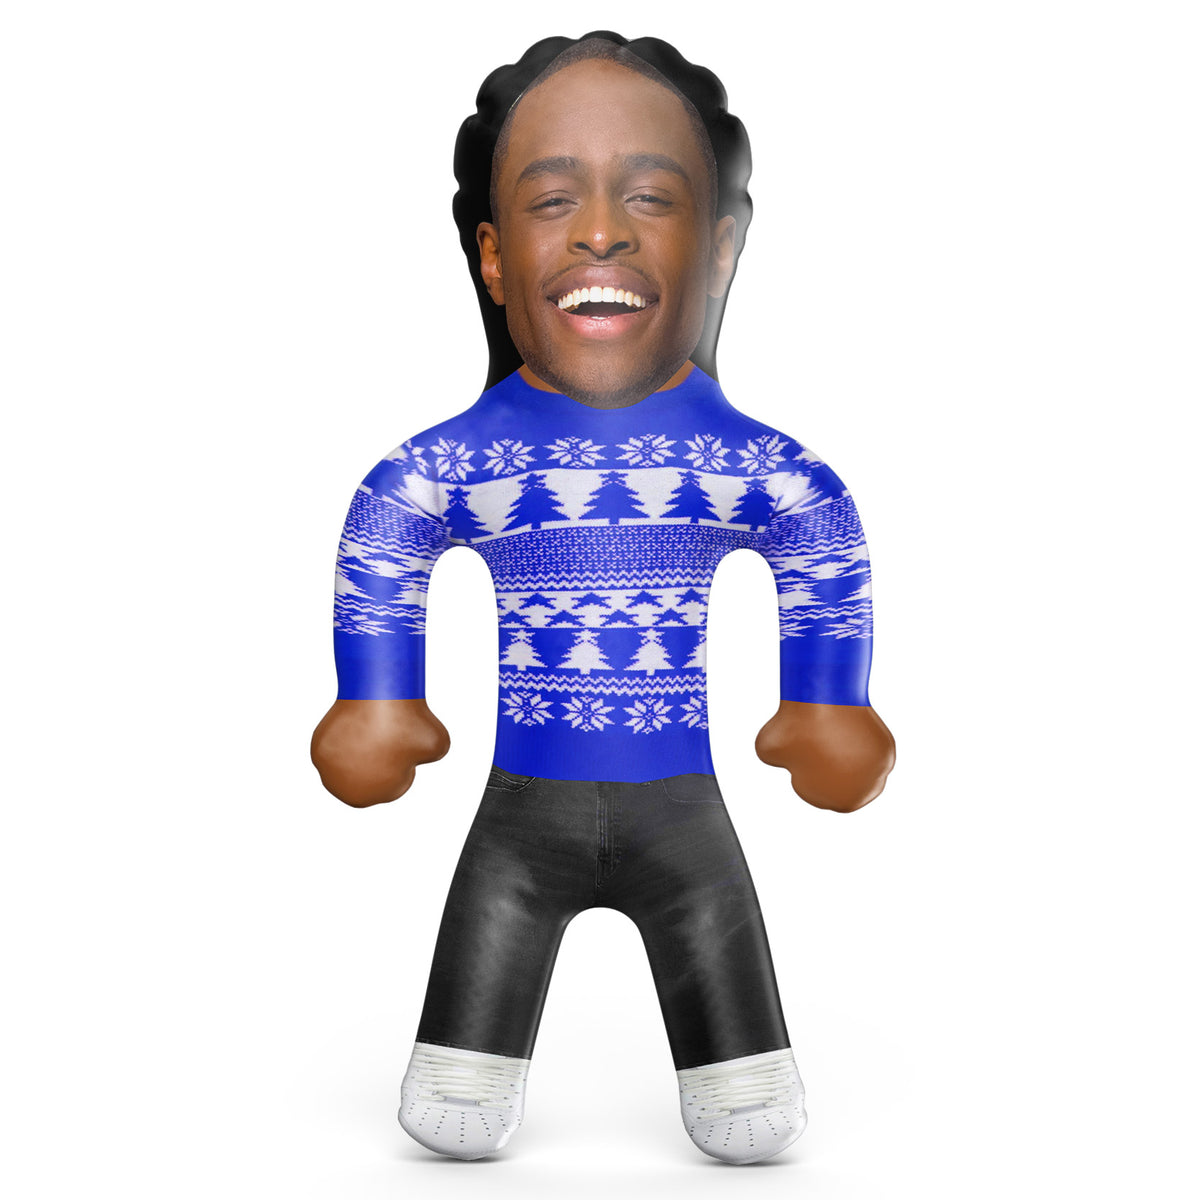 Blue Christmas Jumper Inflatable Doll - Xmas Jumper Blow Up Doll